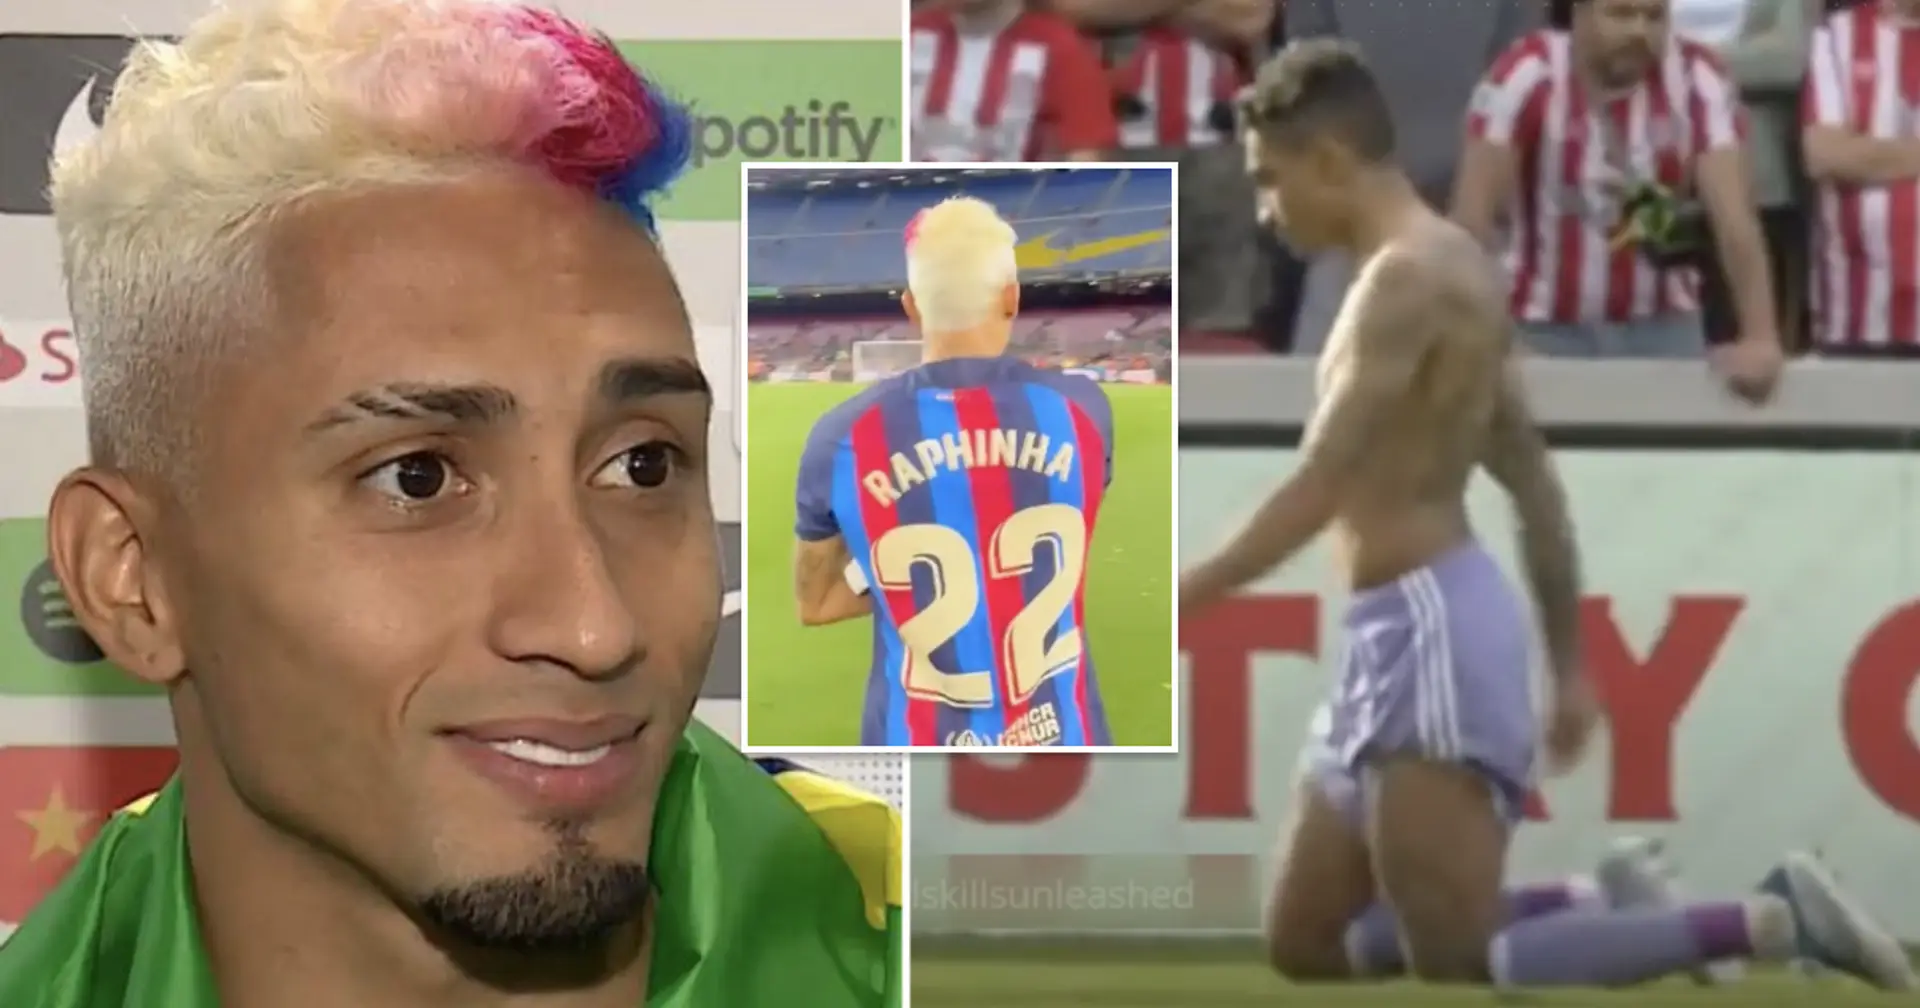 Spotted: Raphinha replicates his famous knee-walk to celebrate La Liga title at Camp Nou